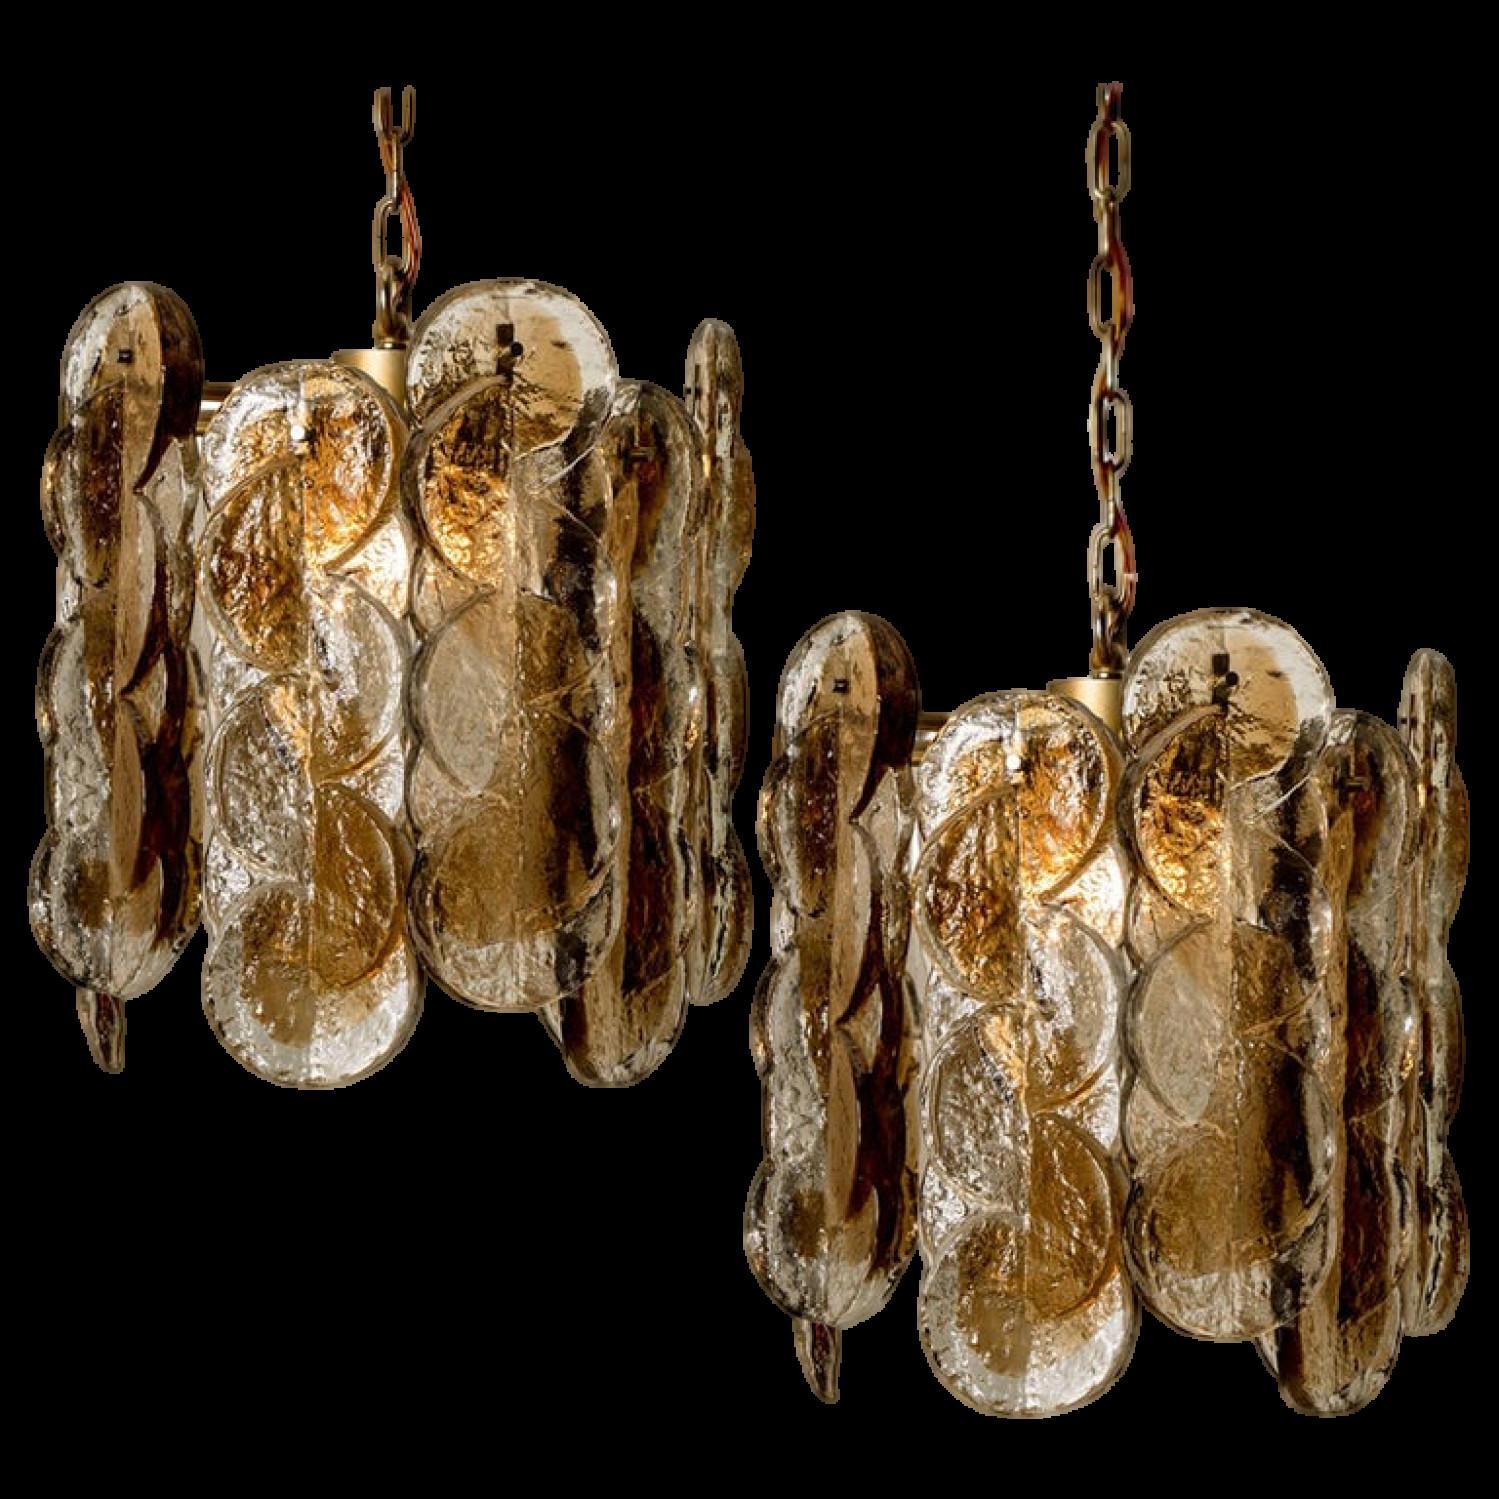 A pair of gorgeous Murano glass pendant lights by Kalmar, 1960s. High quality smoked swirl ice glass, 10 clear twisted crystal glass panels with a light gold dish amber colored stripe in it.

Heavy quality. Cleaned and well-wired, in full working